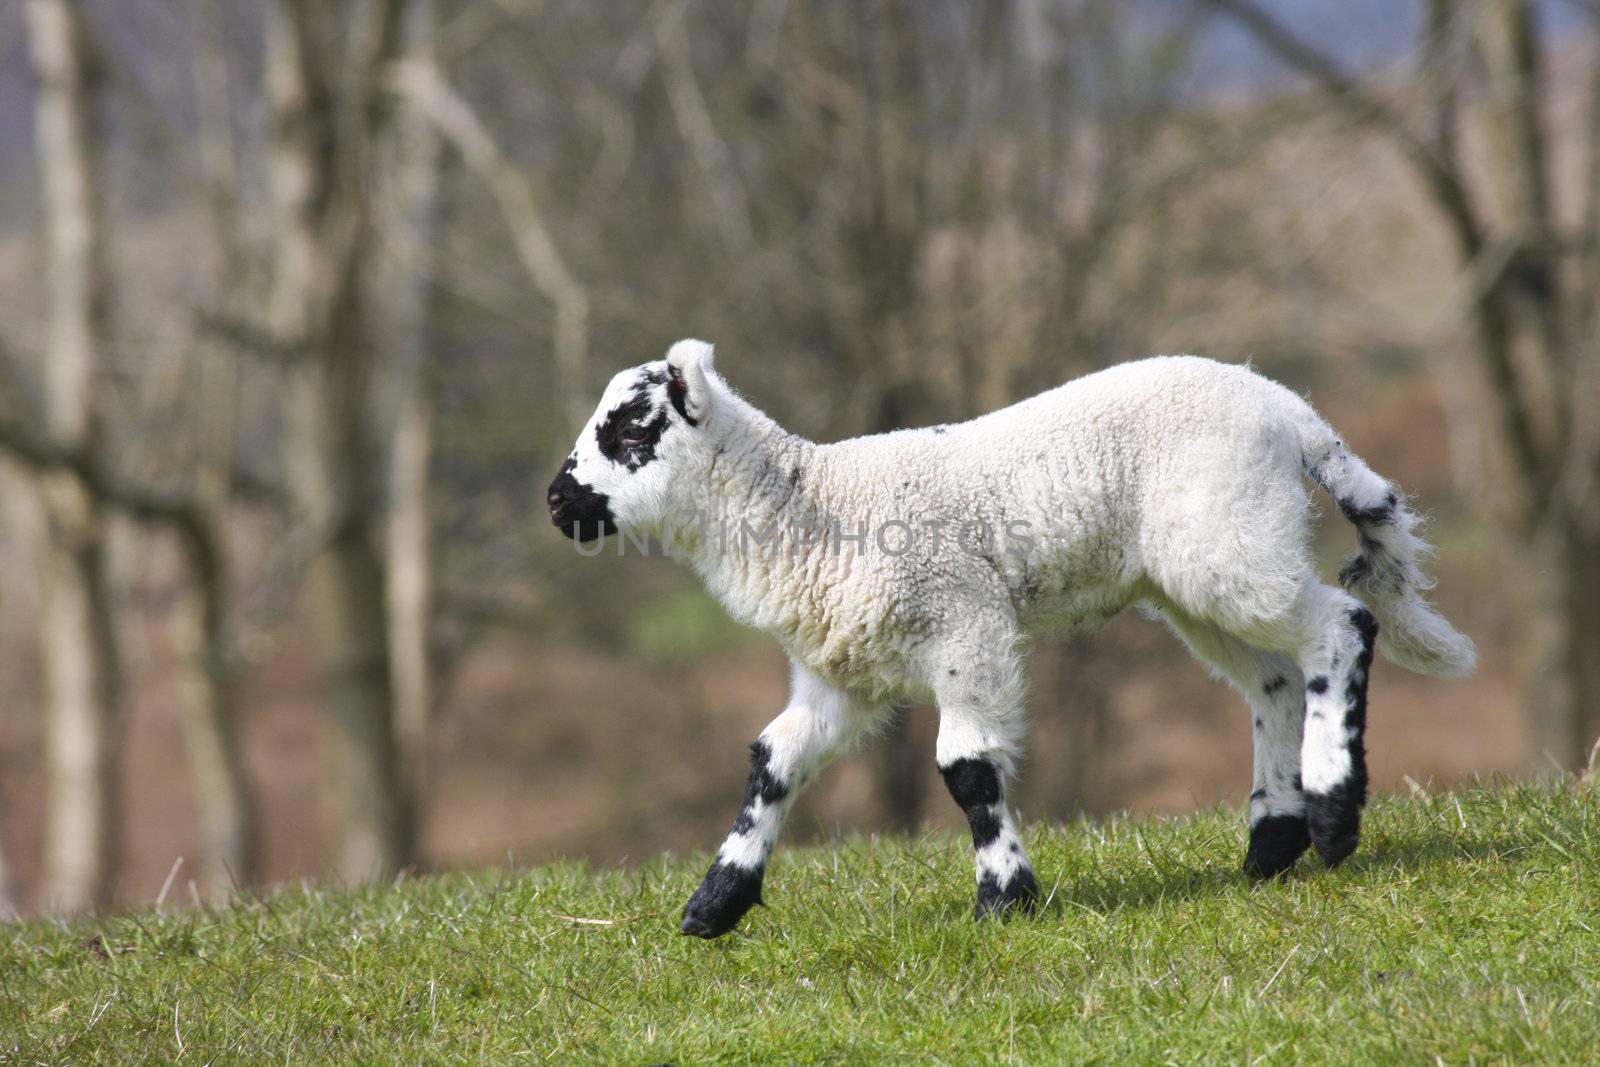 New born lamb running in a green field, black and white markings